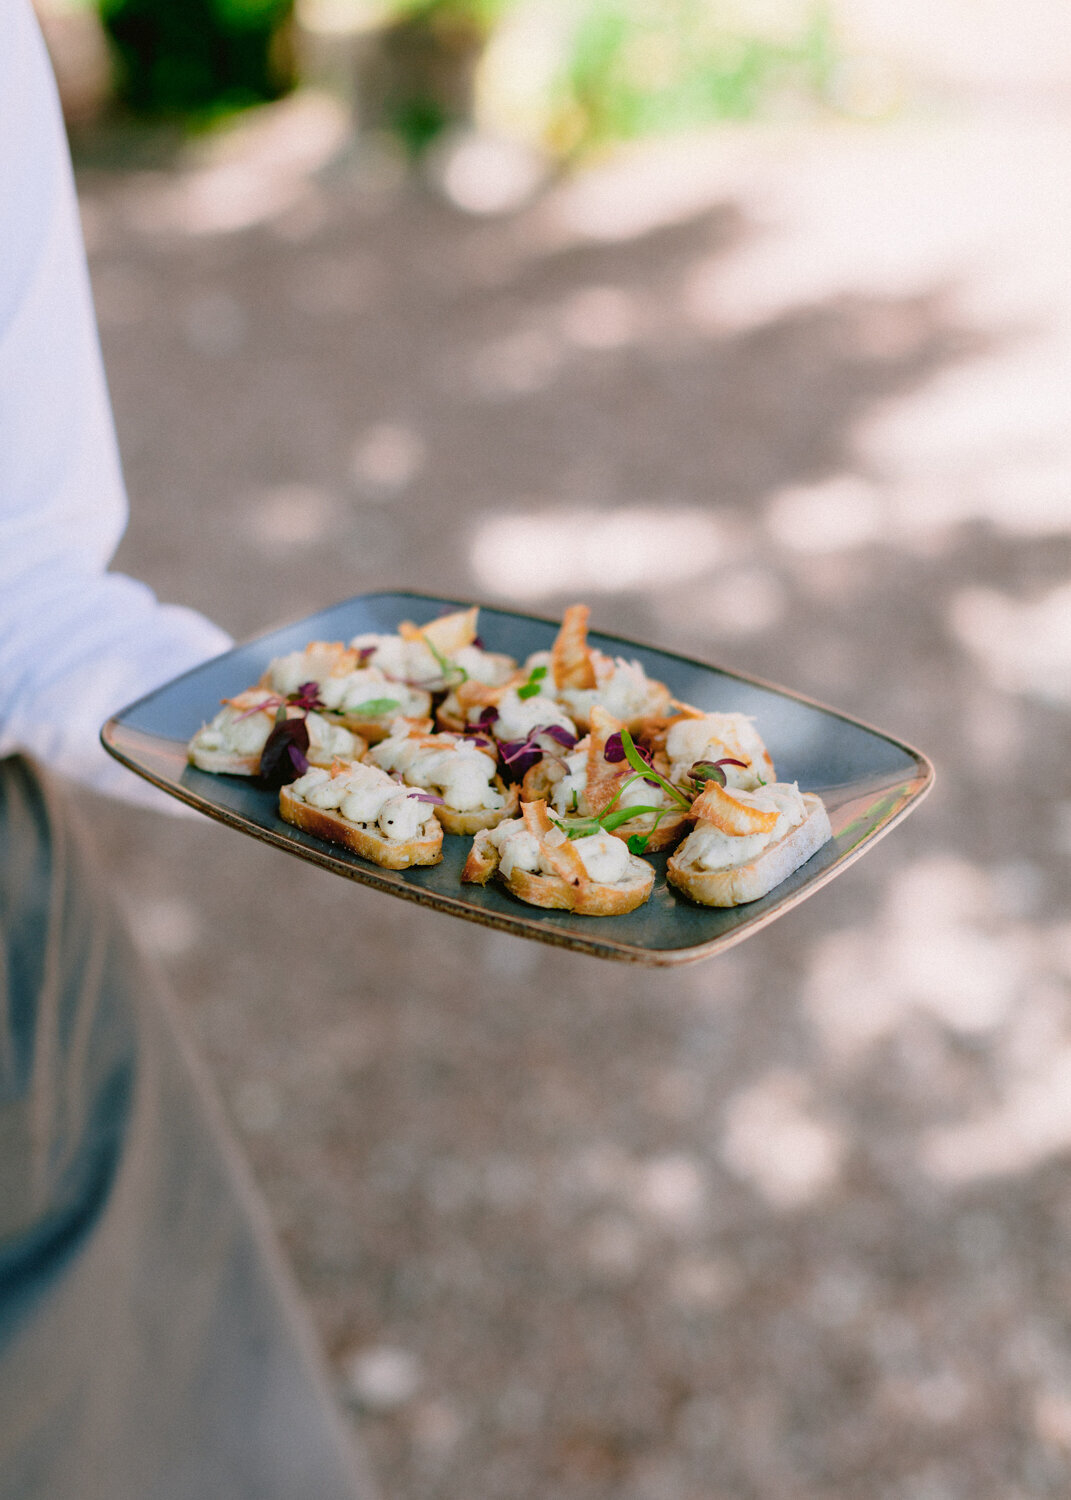 waiter carrying plate with canapés